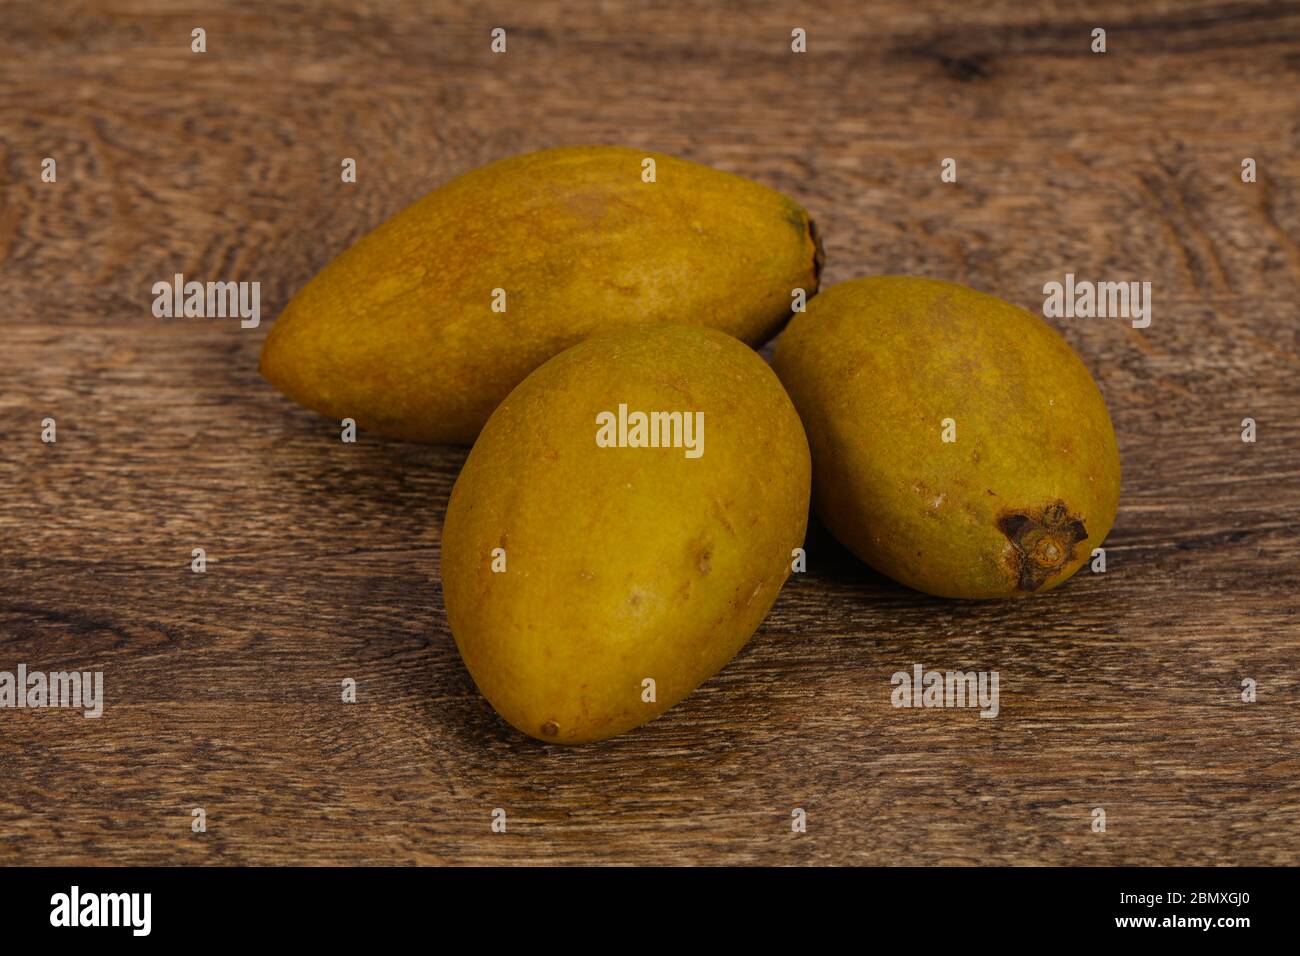 Exotic tropical tasty fruit - Sapodilla in the plate Stock Photo